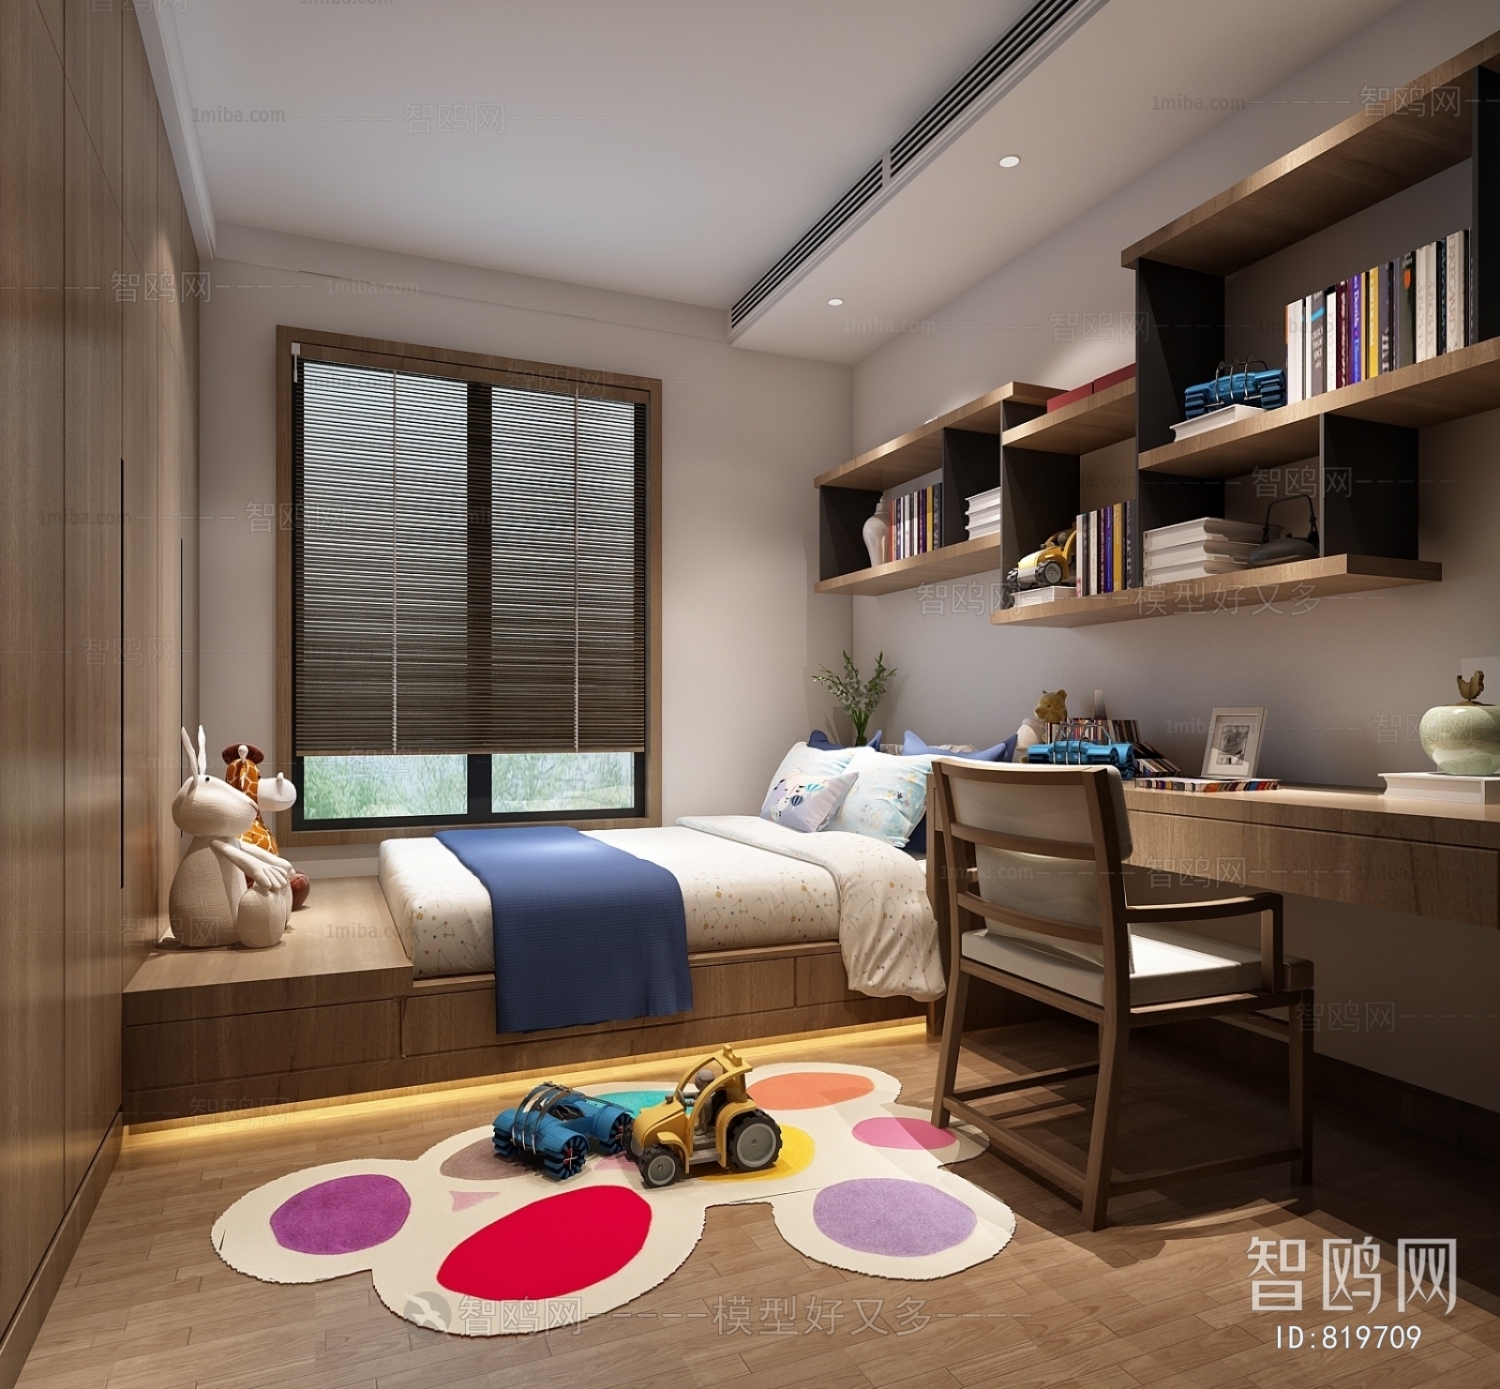 New Chinese Style Children's Room